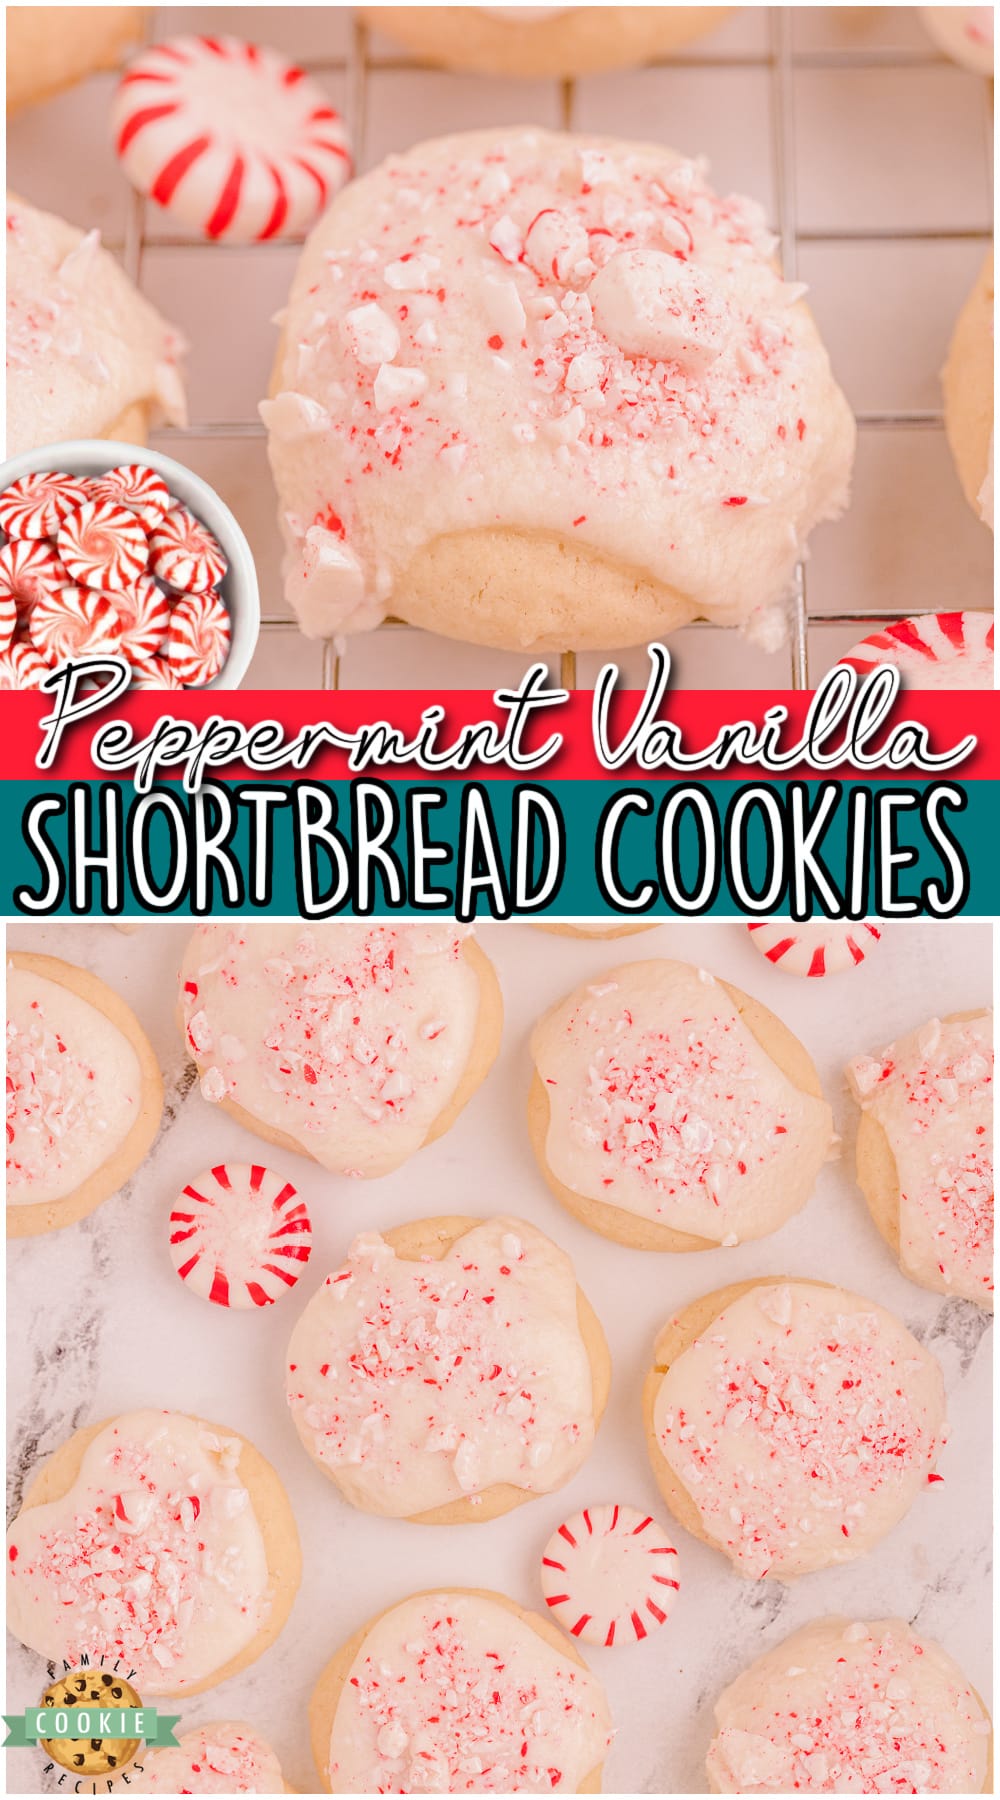 Peppermint Vanilla Shortbread Cookies are tender, buttery whipped shortbread with a lovely peppermint vanilla glaze! Delicious Christmas shortbread cookies for holiday trays!